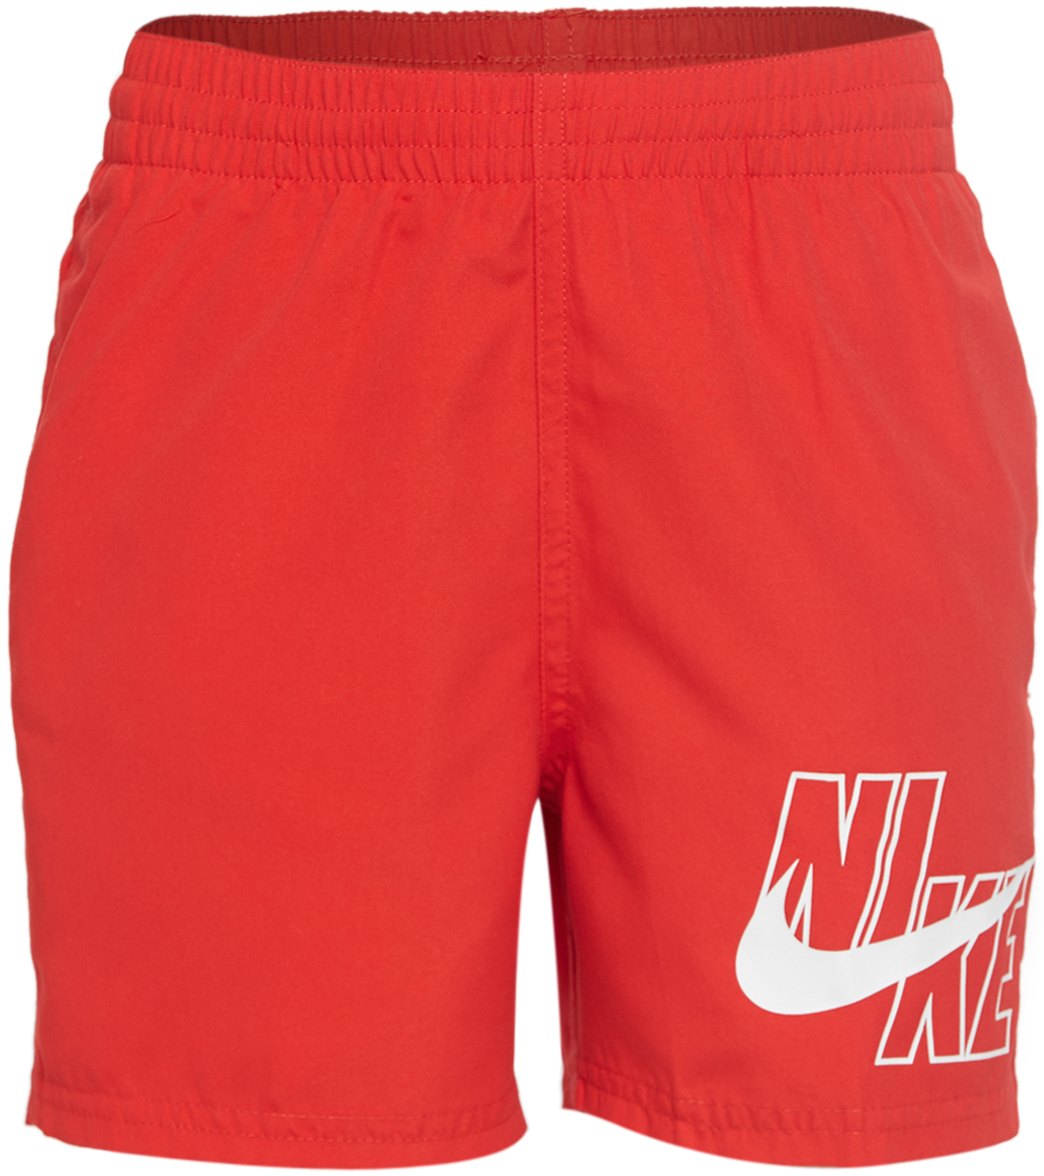 Nike Boys' Logo Solid 4 Volley Short Big Kid - University Red Xl 20 Polyester - Swimoutlet.com